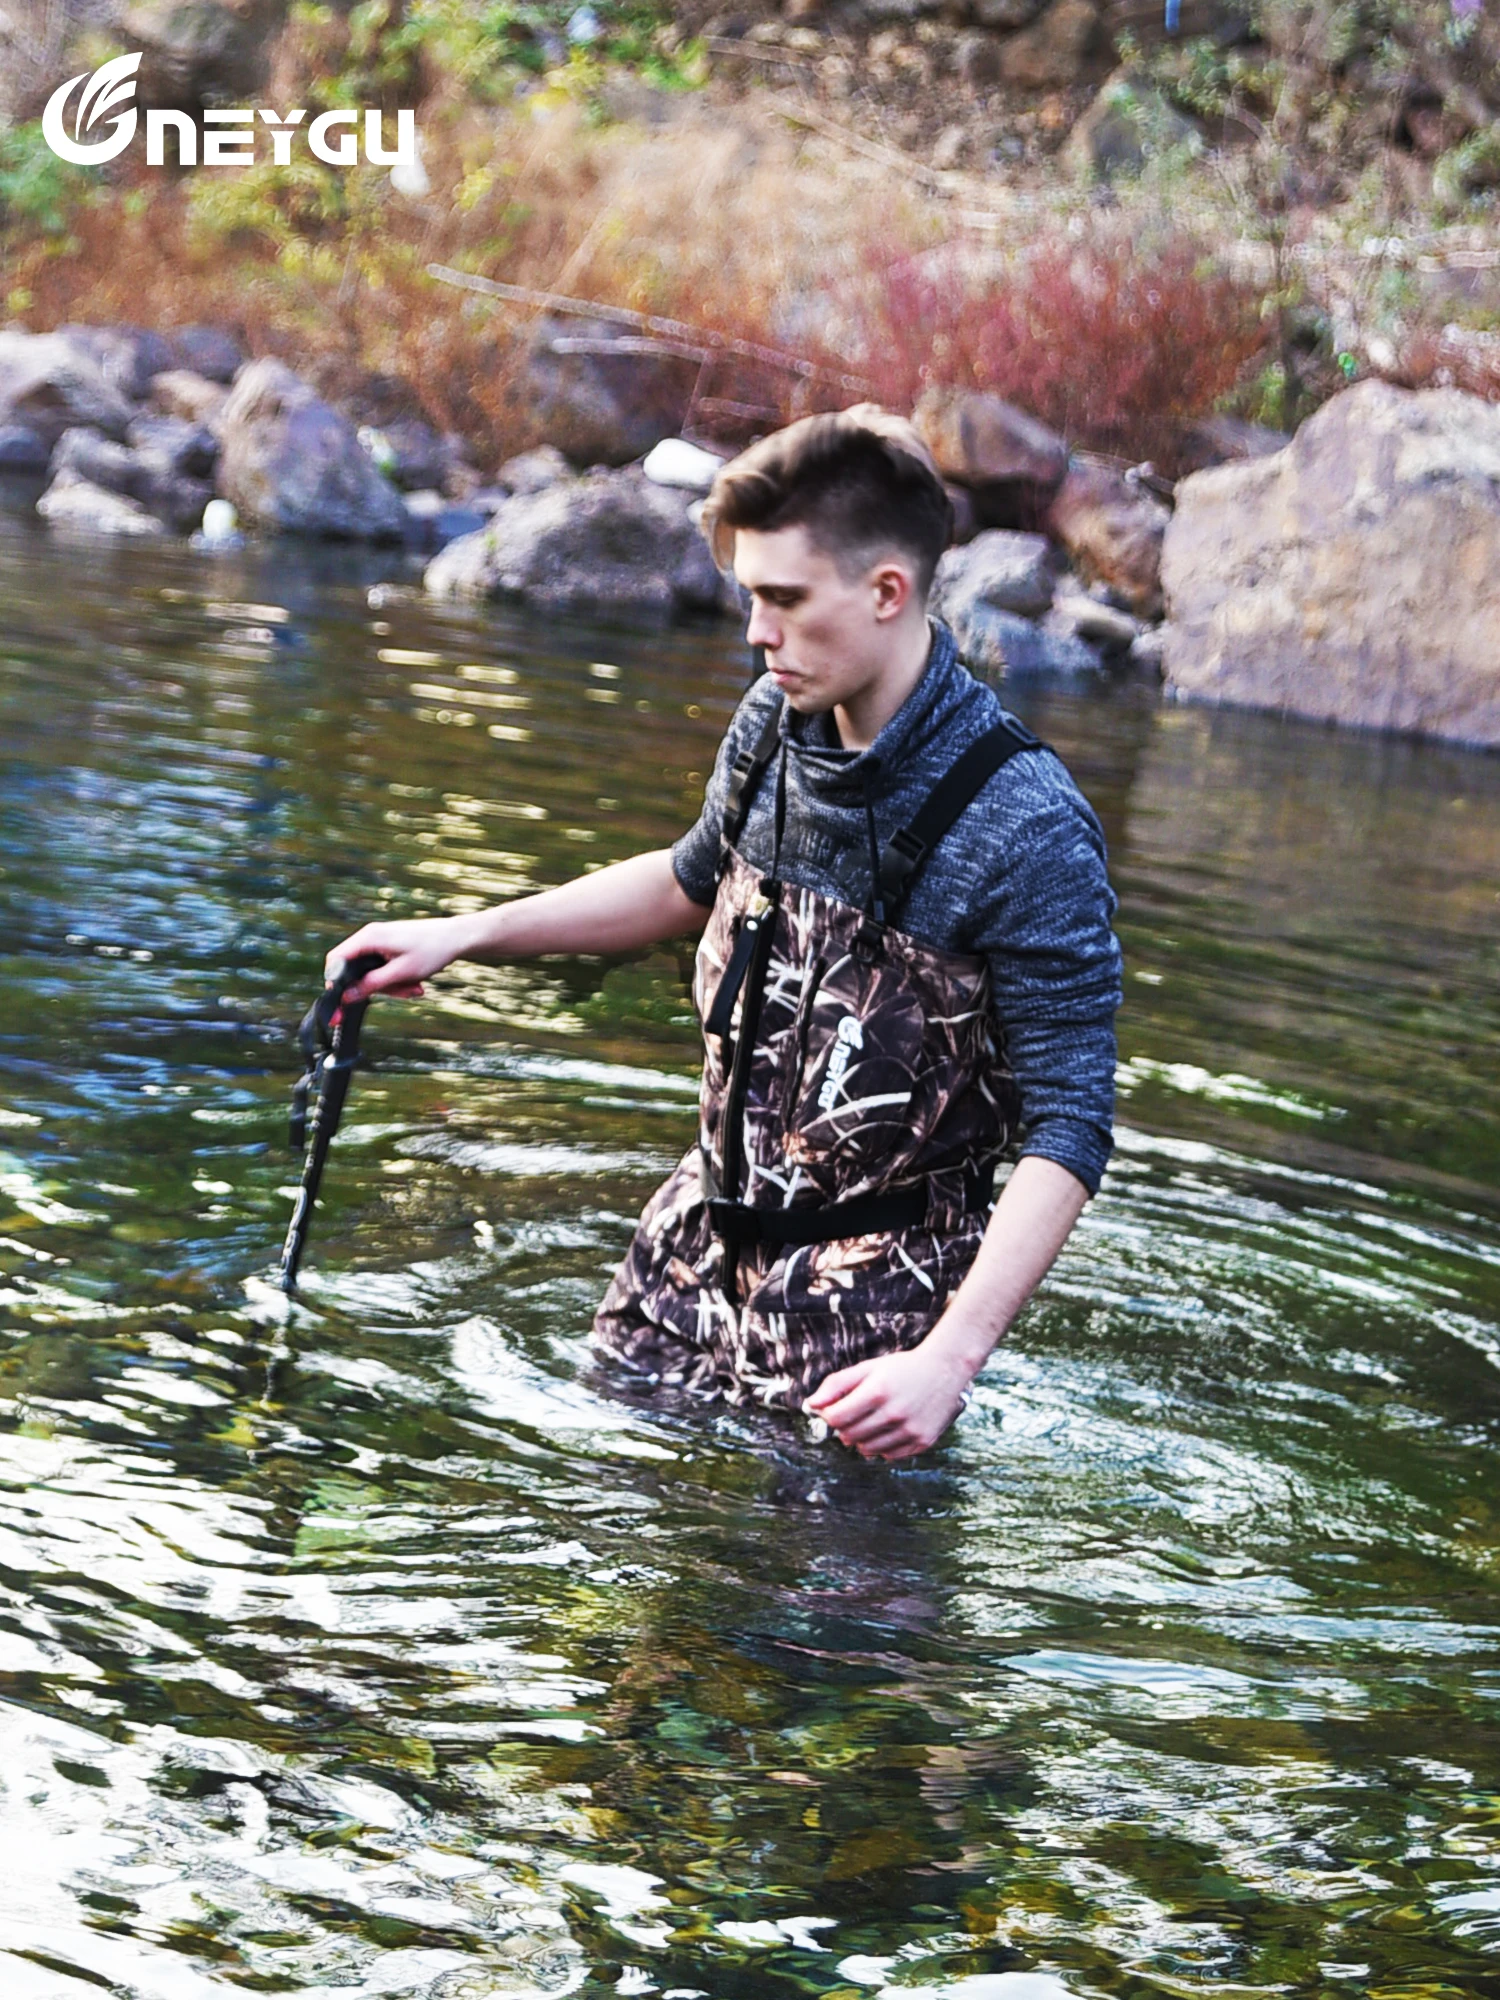 https://ae01.alicdn.com/kf/H5f6620631ca049fbb9a9cf742f4eef84e/NEYGU-waist-high-waterproof-breathable-Overalls-fishing-waders-with-Reach-through-hand-warmer-pocket-for-men.jpg